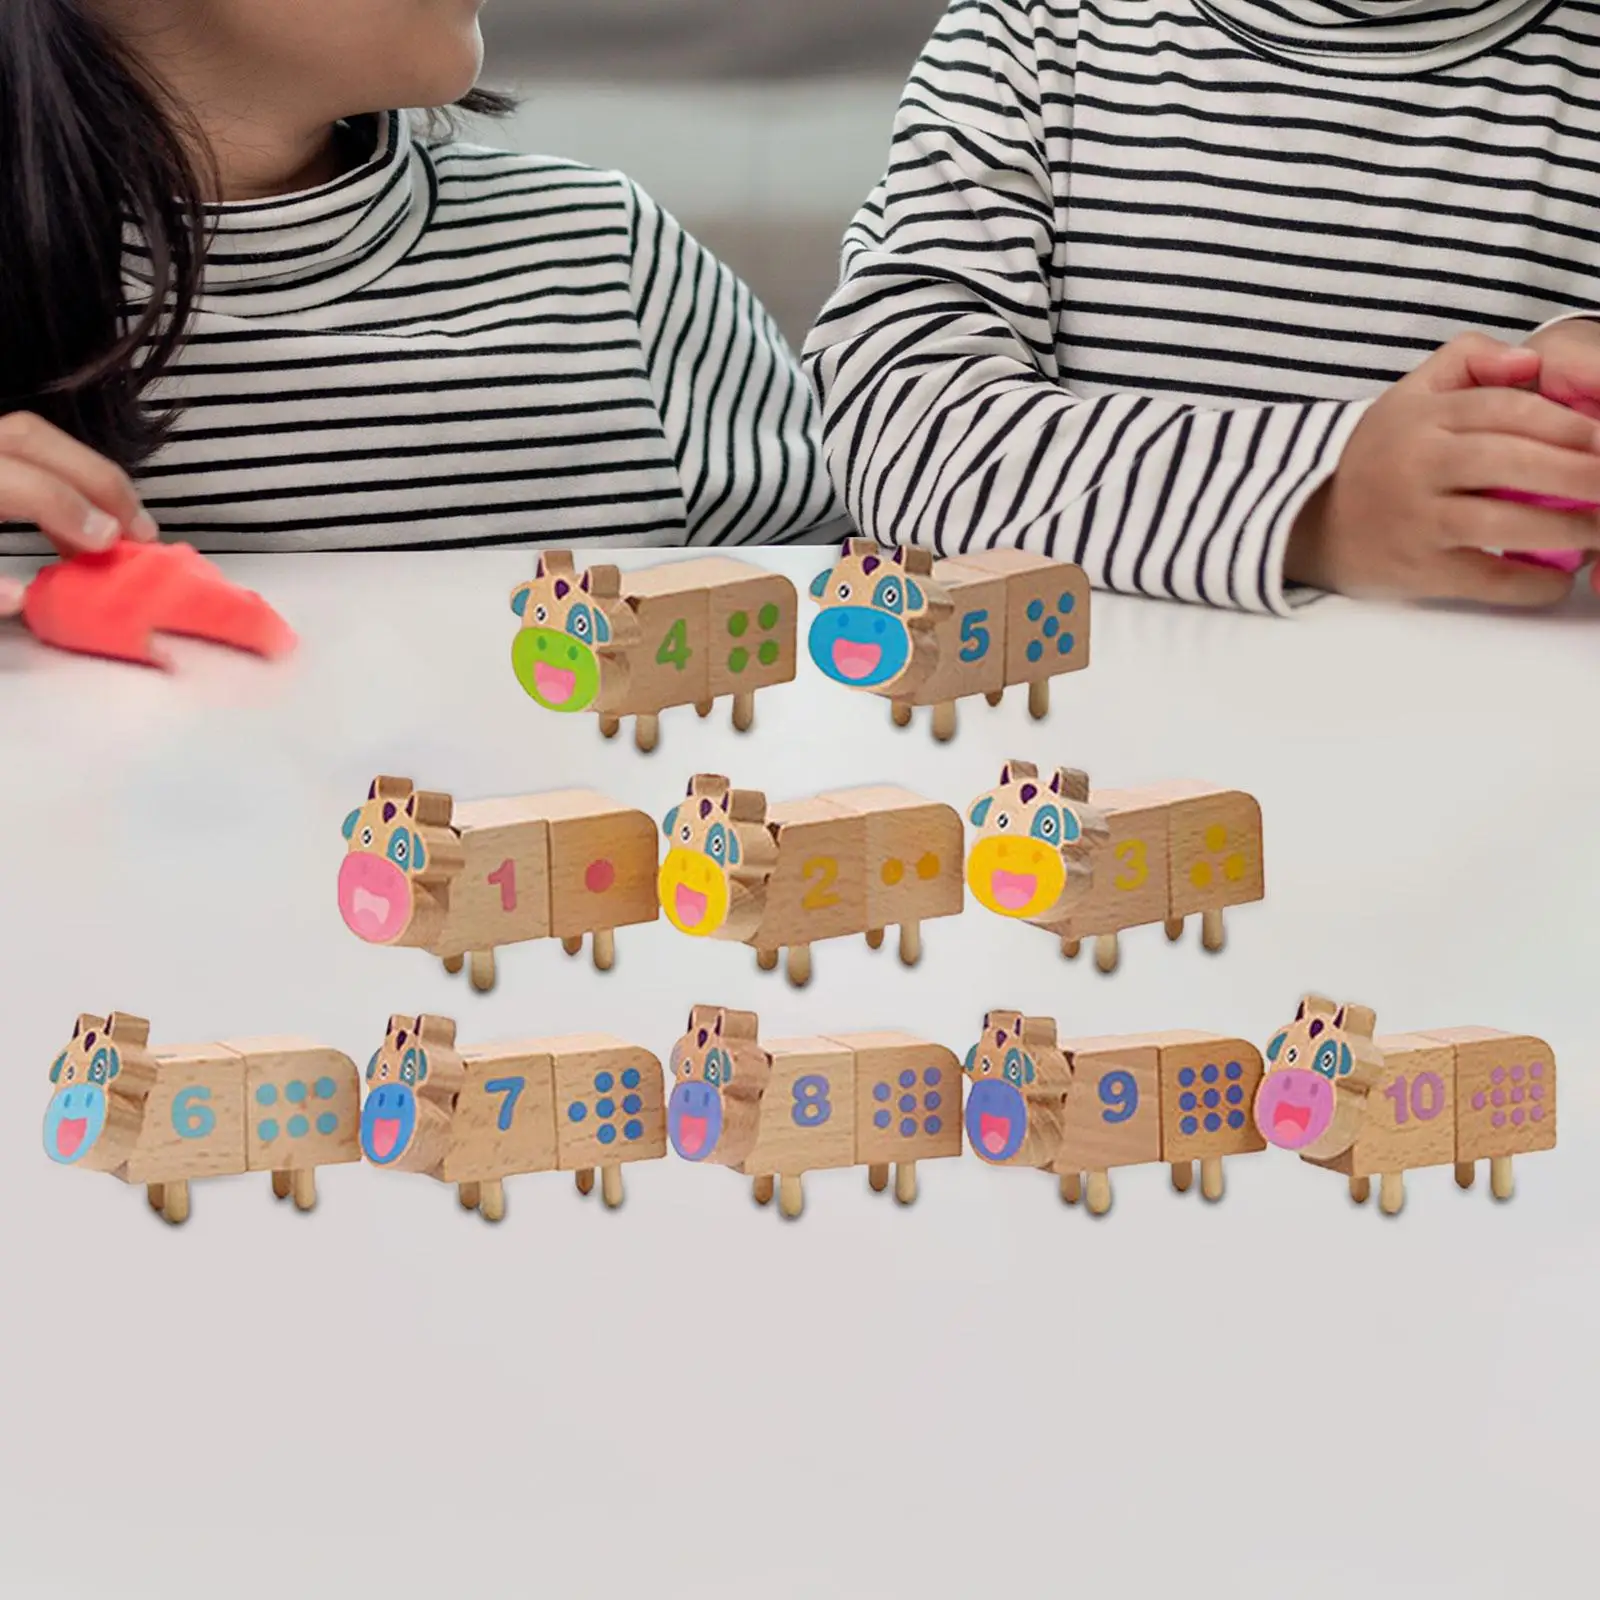 10 Pieces Wooden Building Blocks for Toddlers Preschool Learning Activities Educational Learning Toys for Boys Girls Kids Gifts